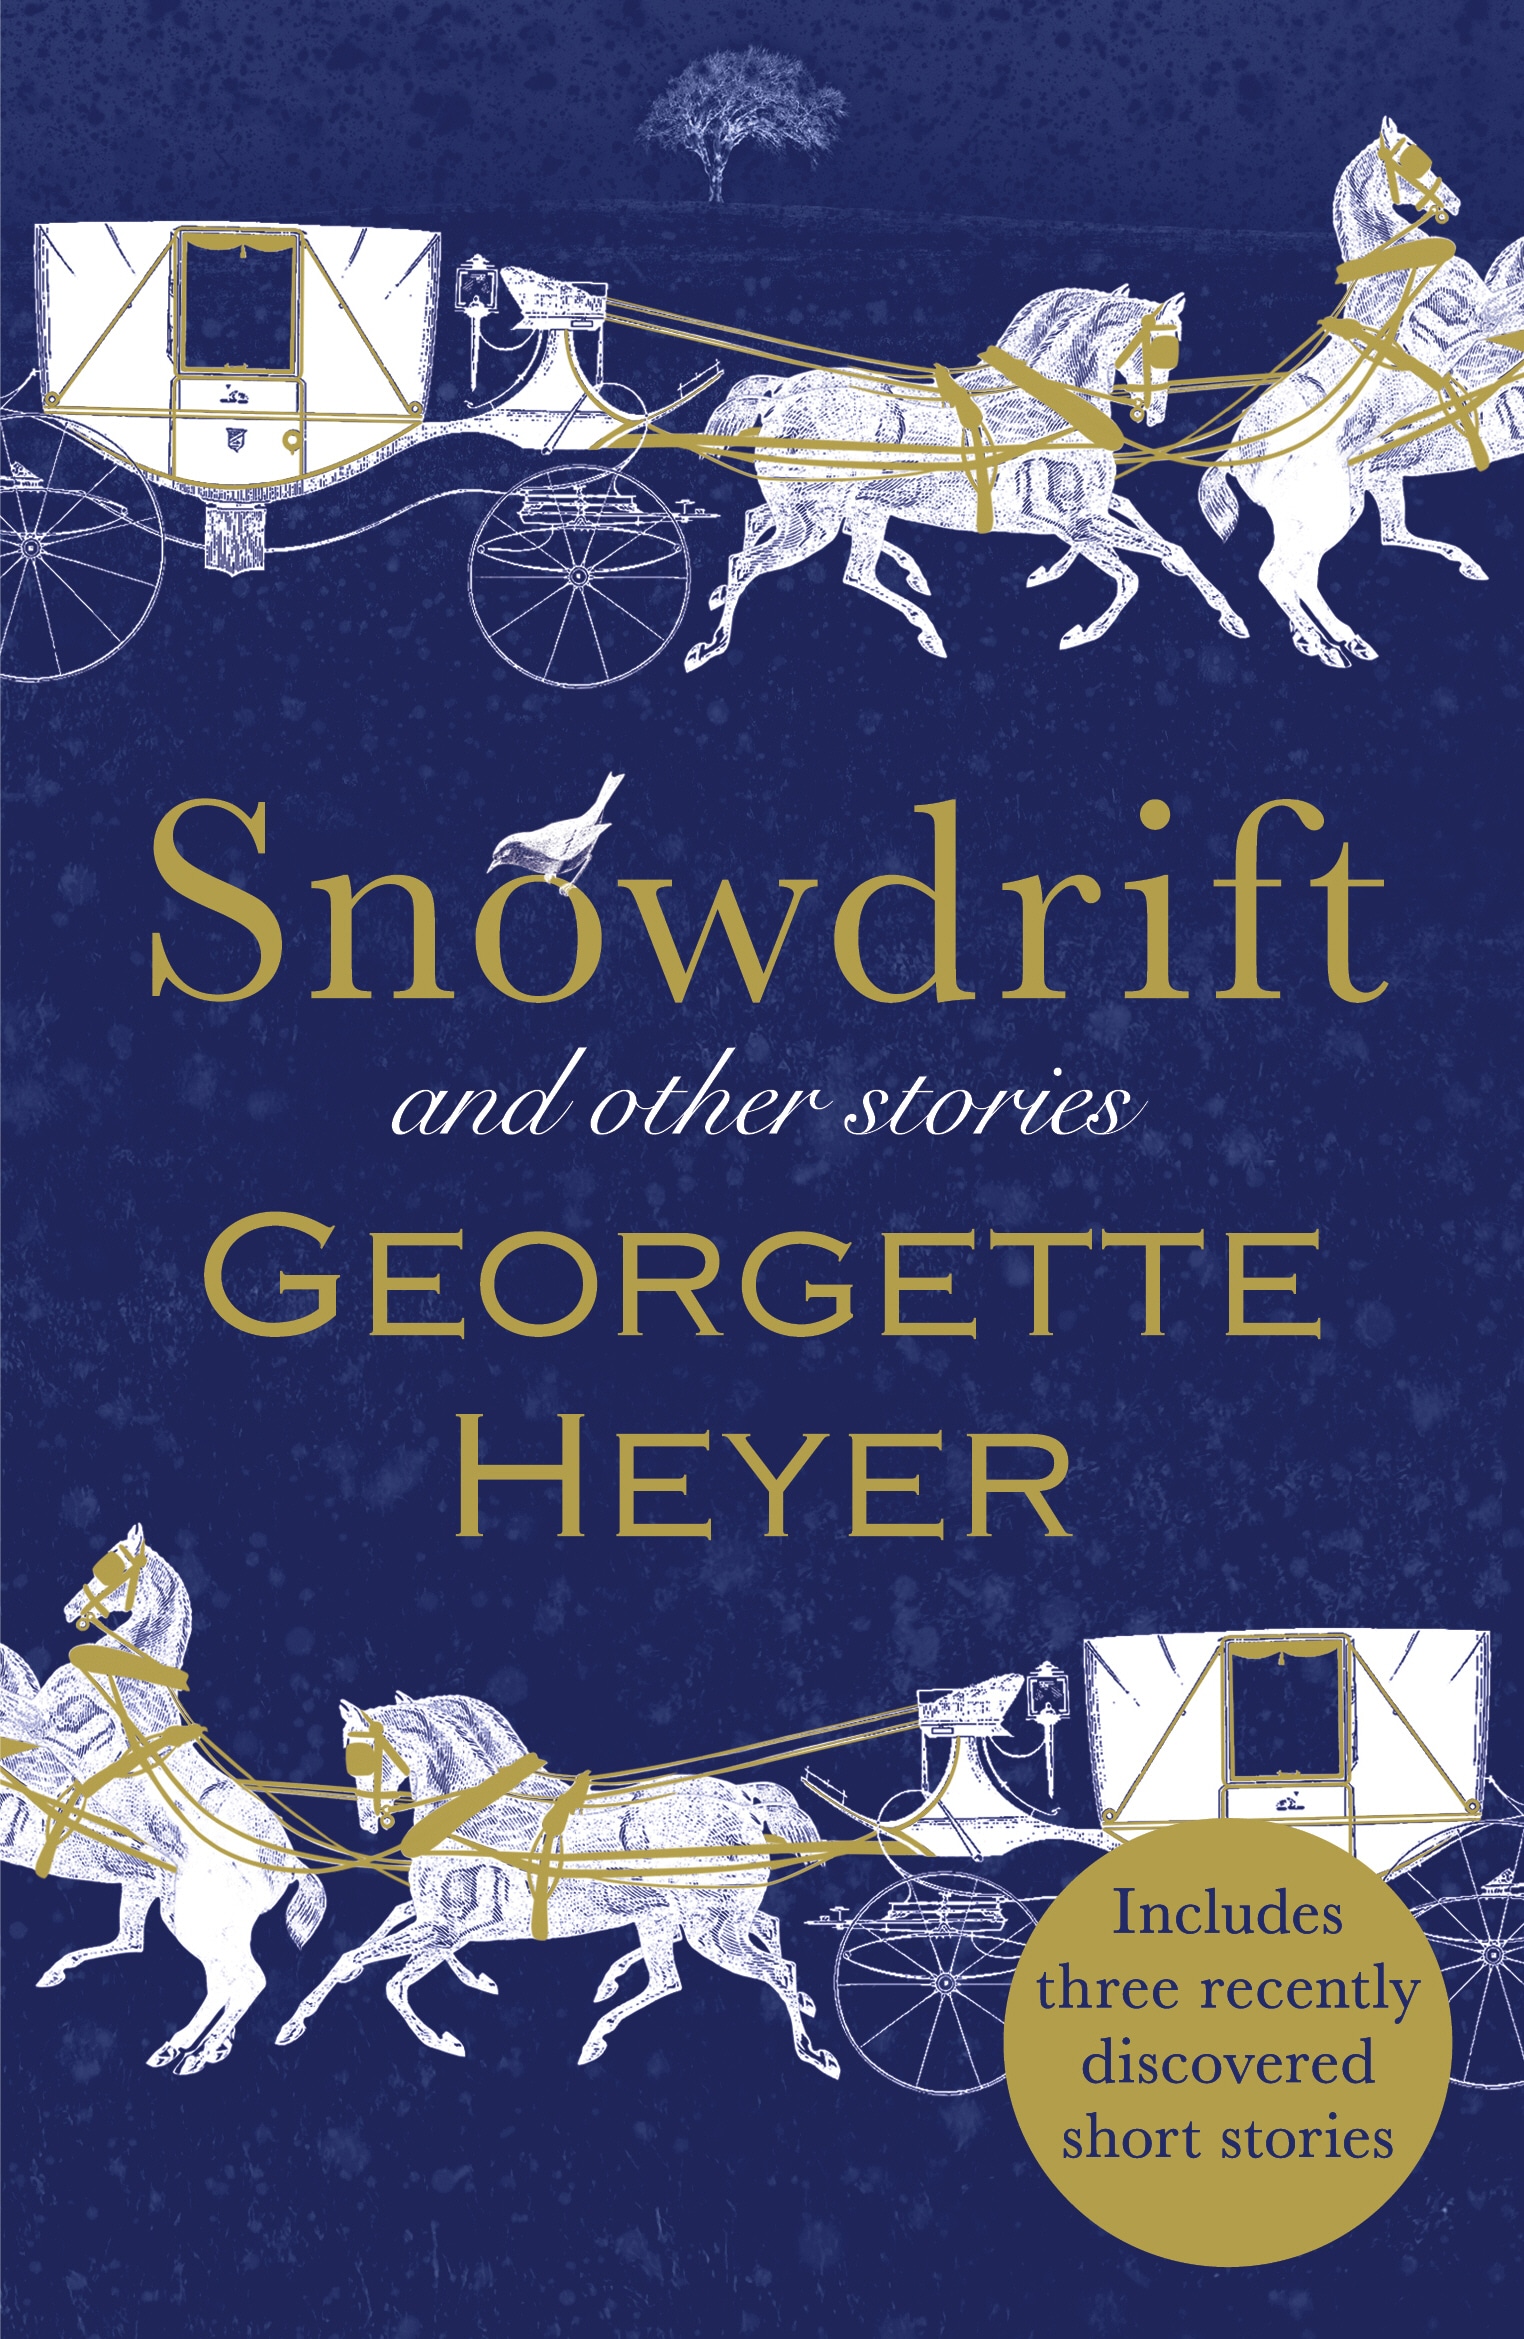 Book “Snowdrift and Other Stories (includes three new recently discovered short stories)” by Georgette Heyer — October 19, 2017